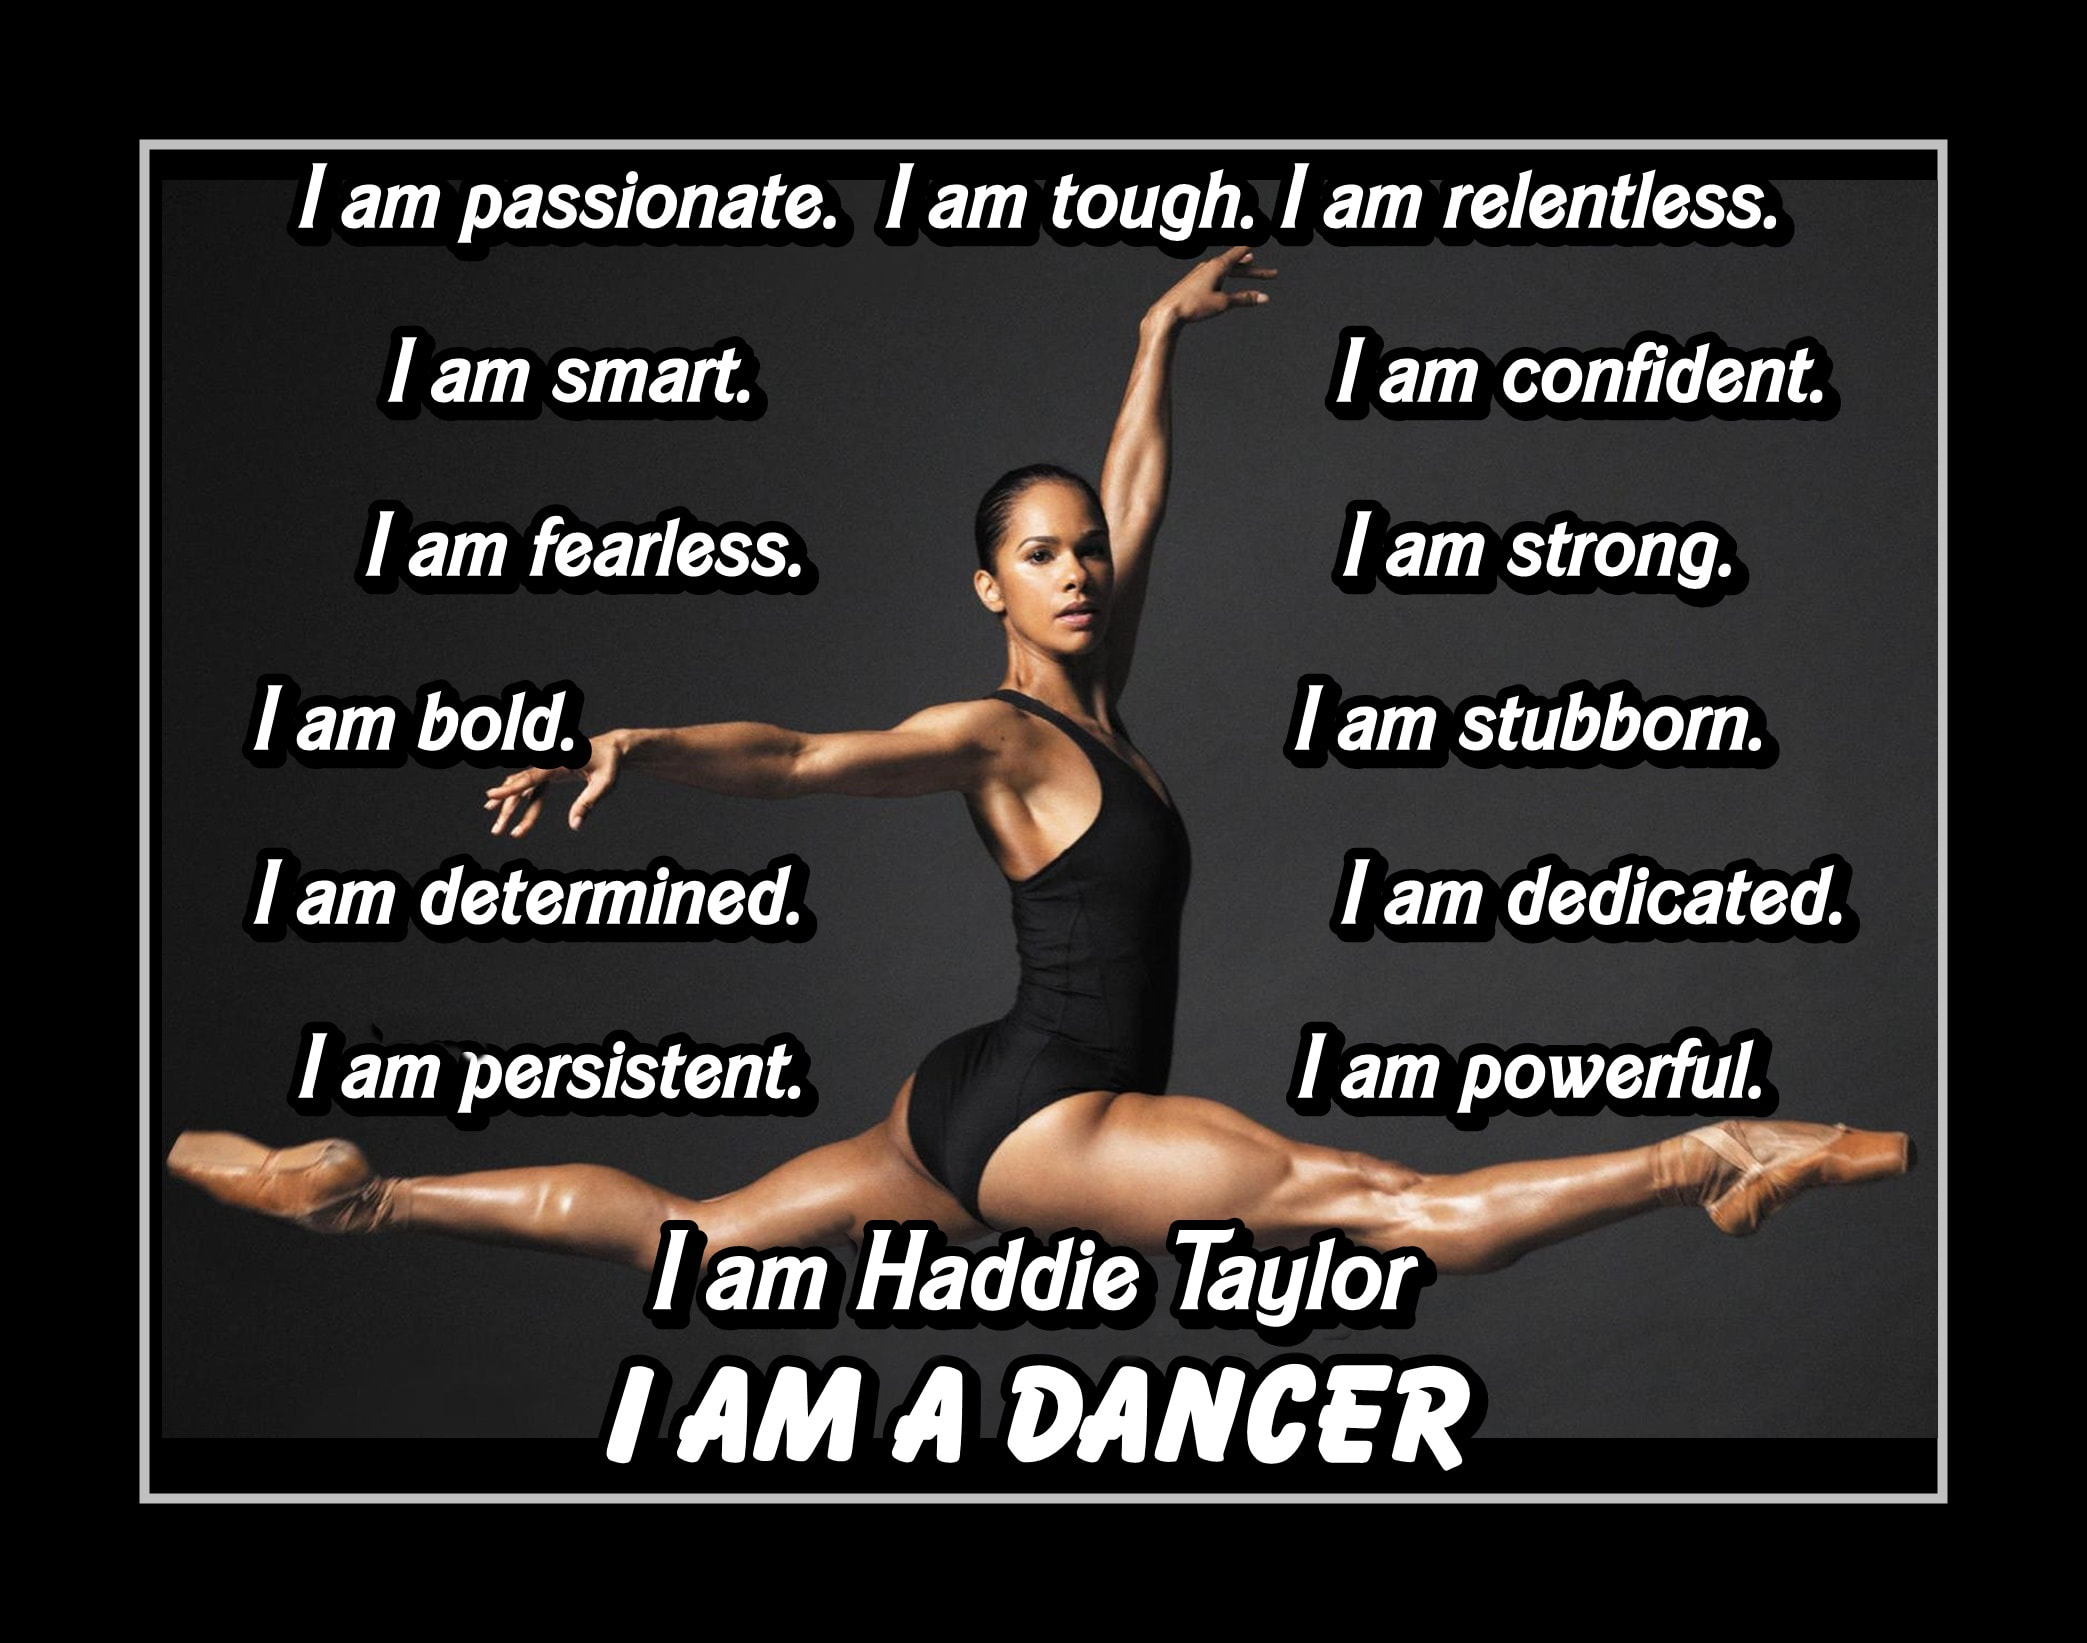 Personalized 'I am a Dancer' Misty Copeland Ballerina Quote Poster